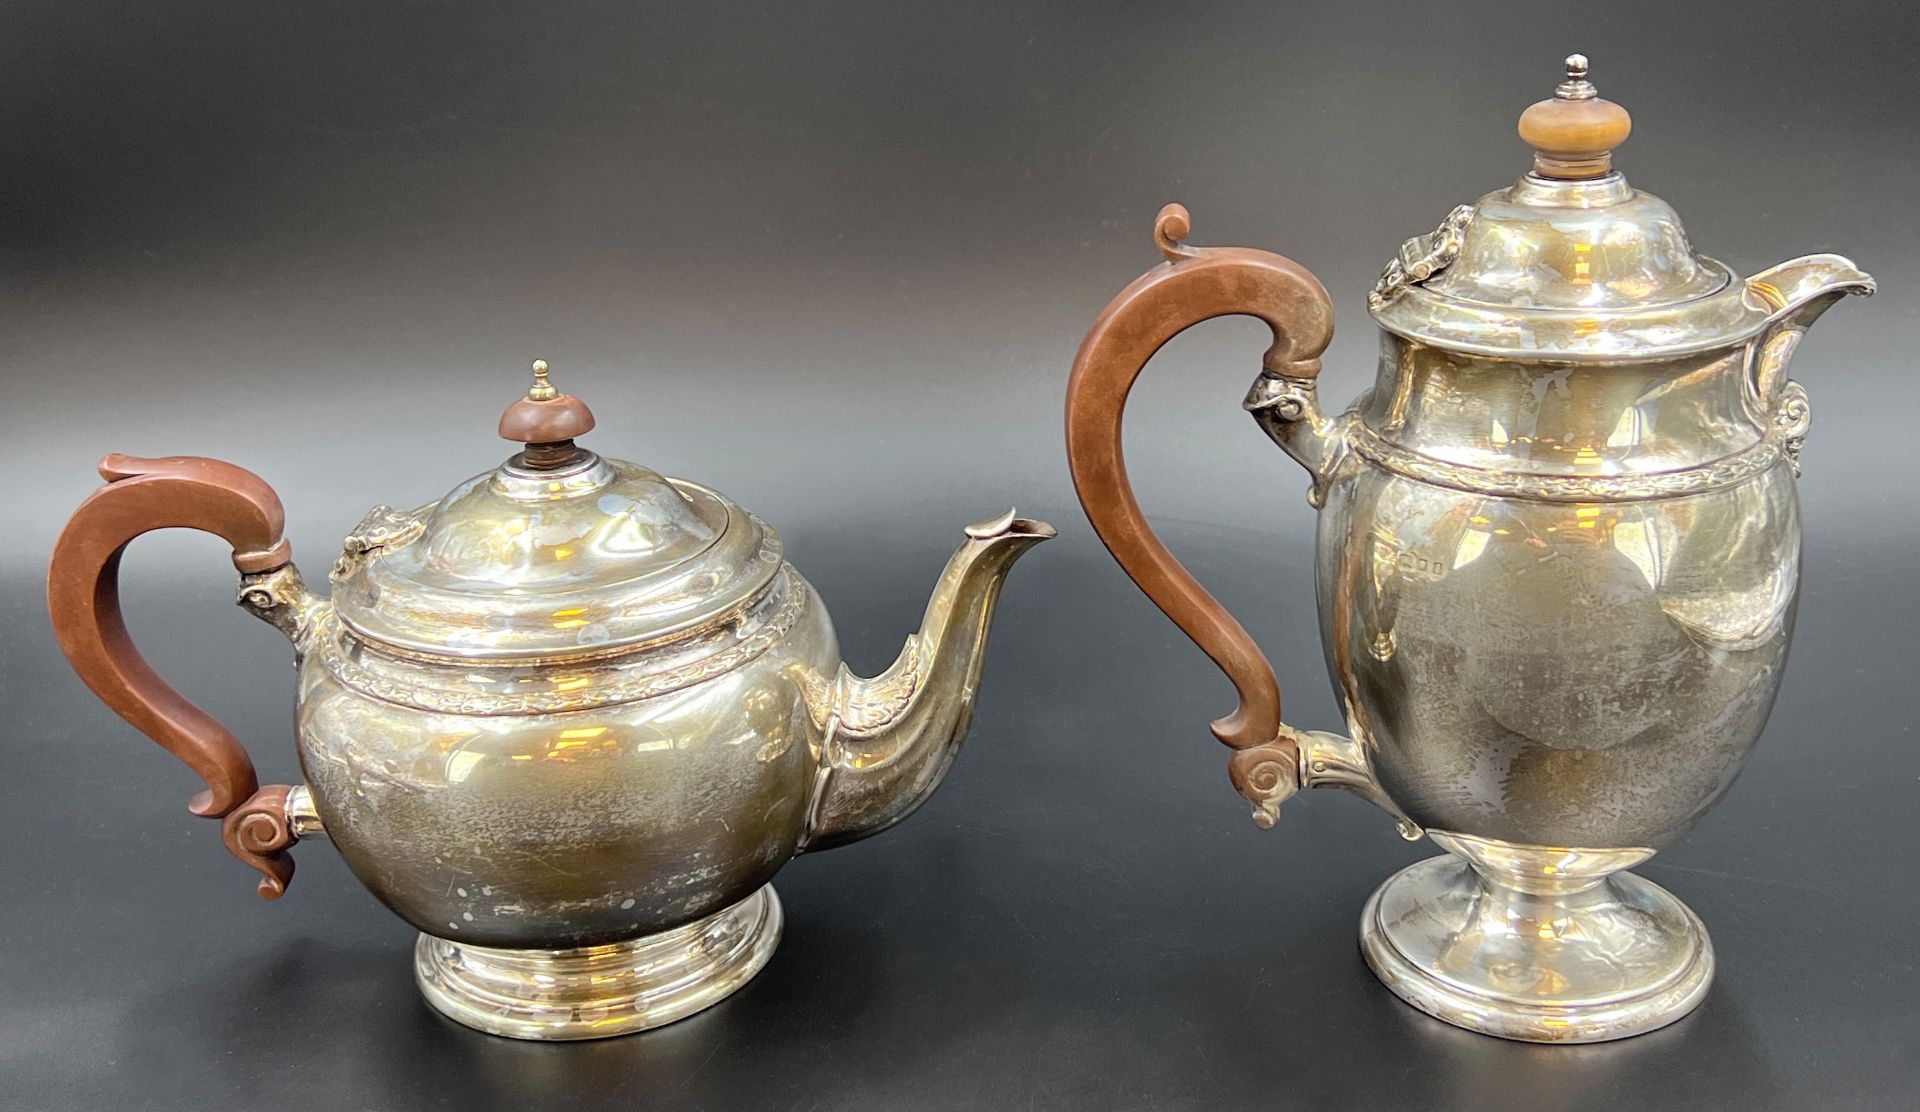 Antique tea and coffee pot. 925 sterling silver. Goldsmiths & Silversmiths Co. London. Circa 1900. - Image 4 of 19